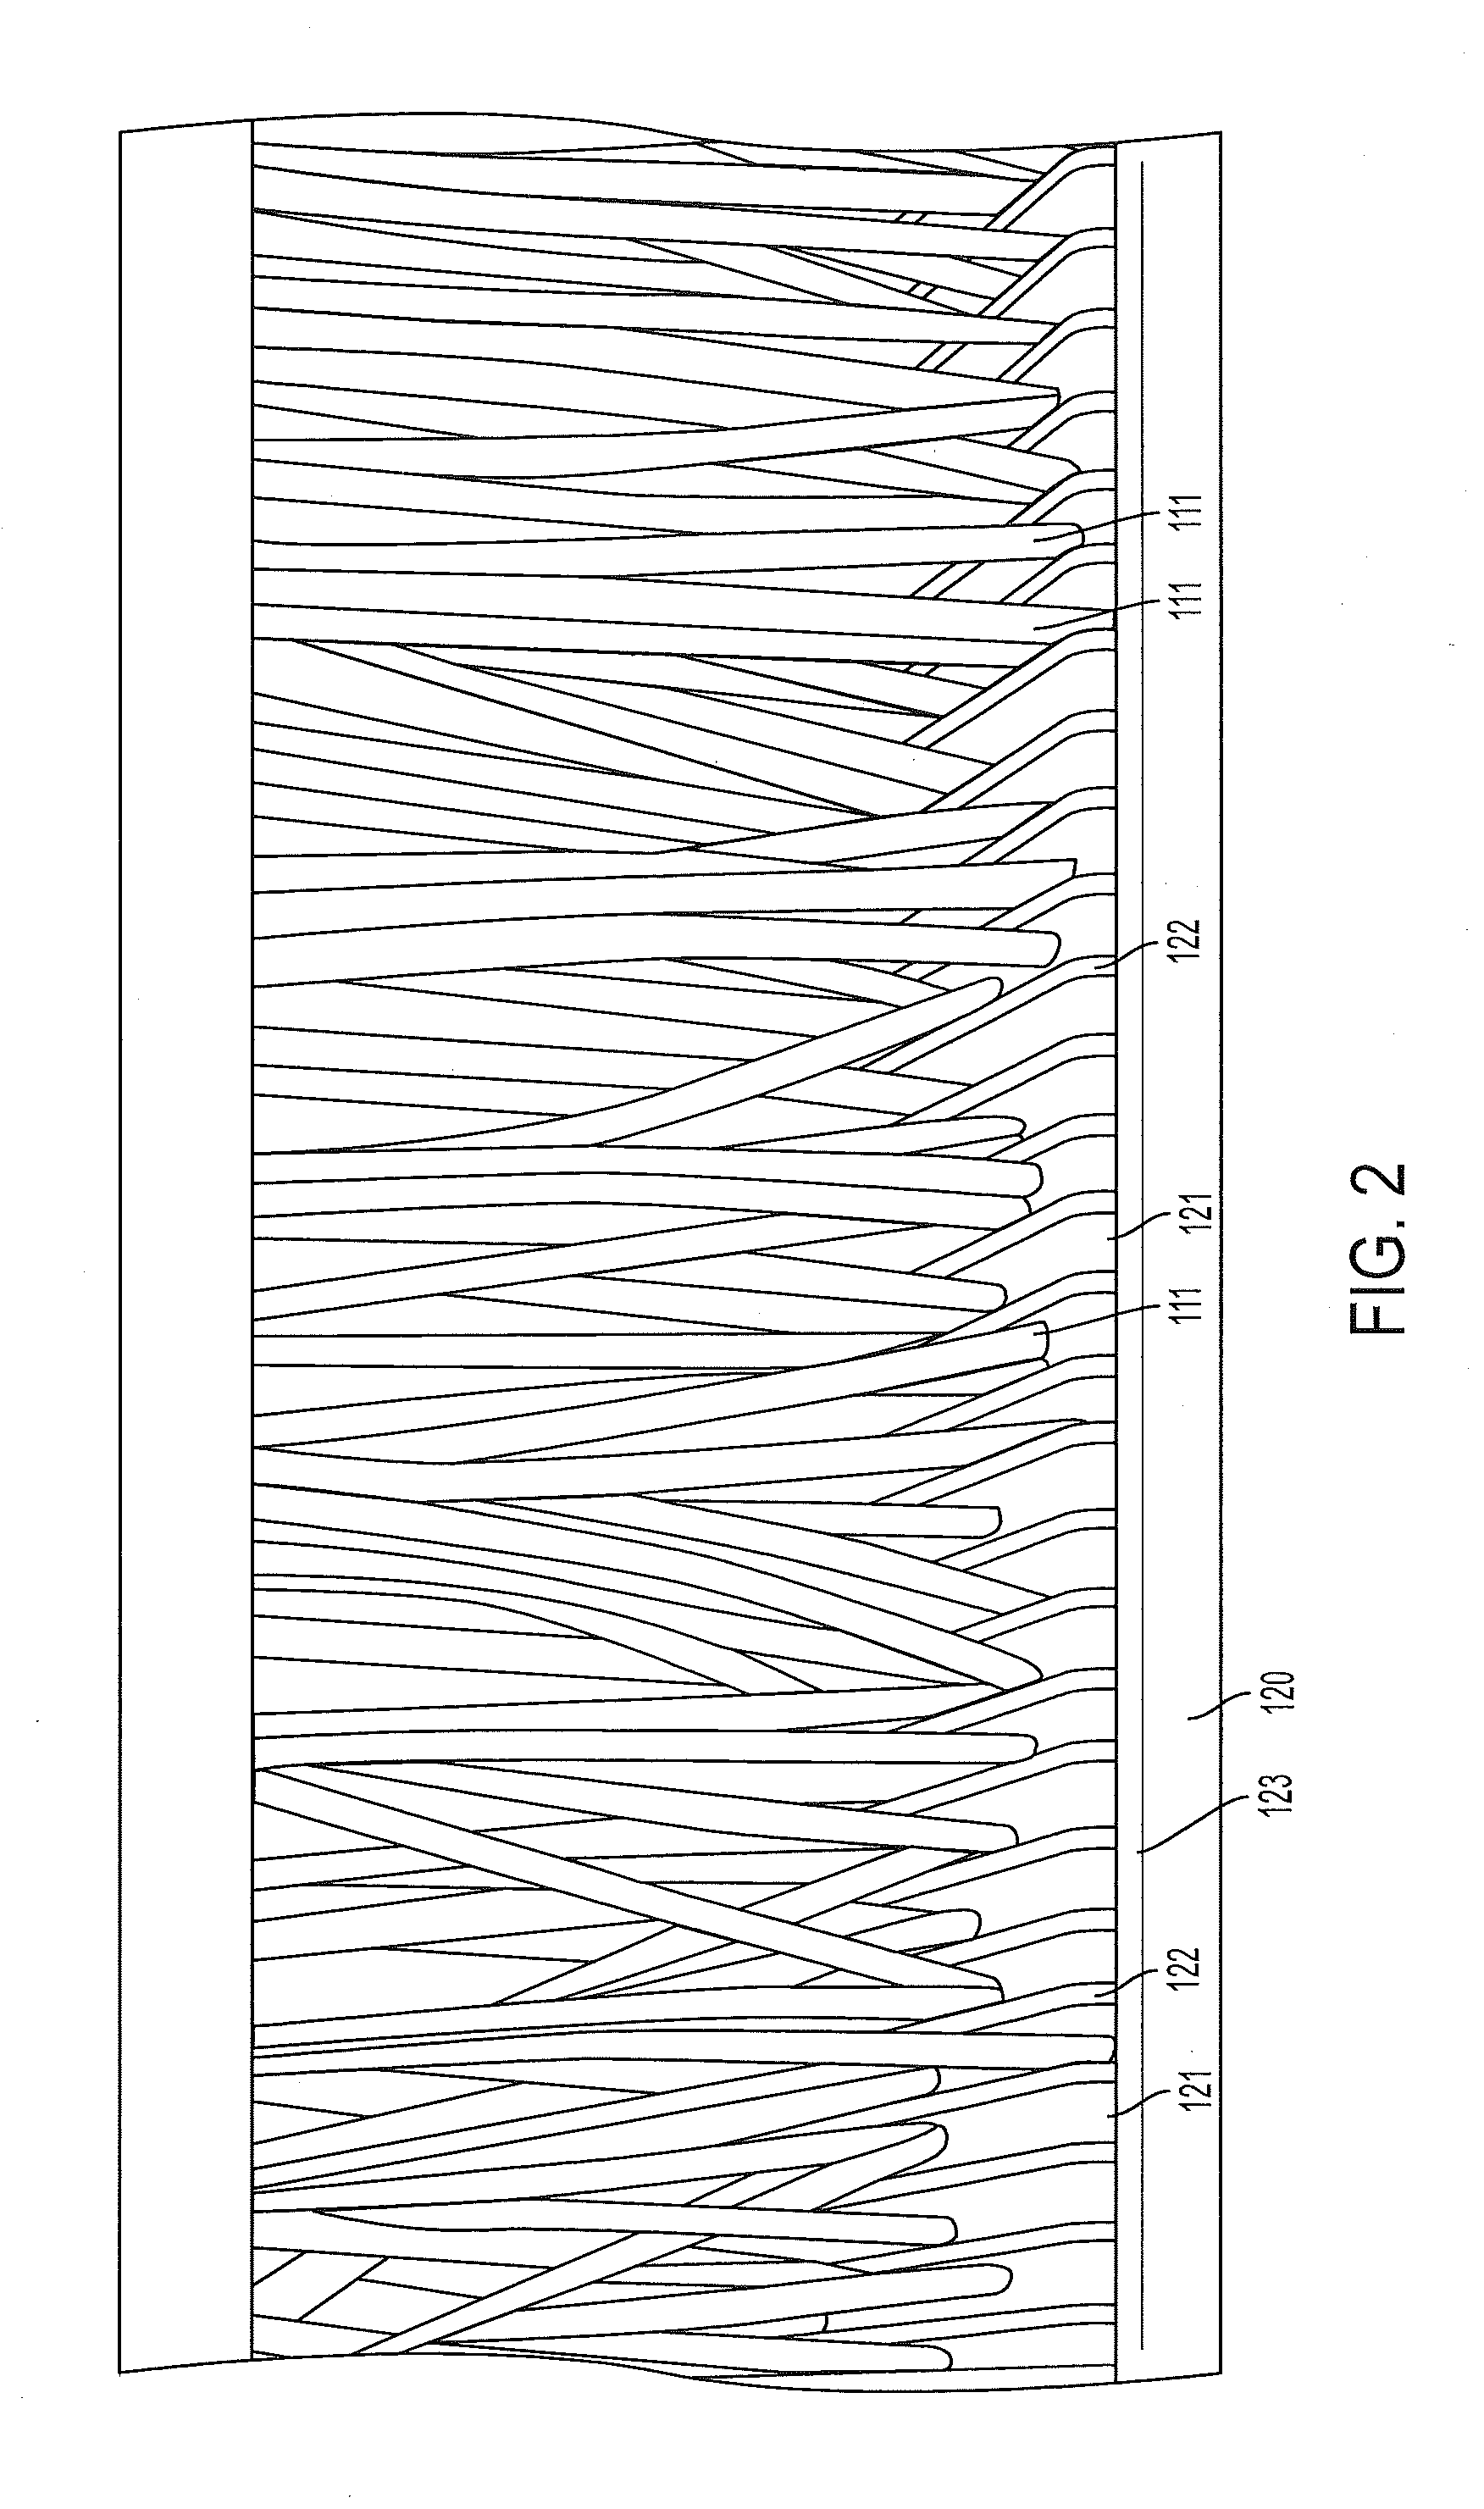 Apparatus, System And Method For Mechanical, Selective Weed Control In Mature And Establishing Crops Including Turfgrasses